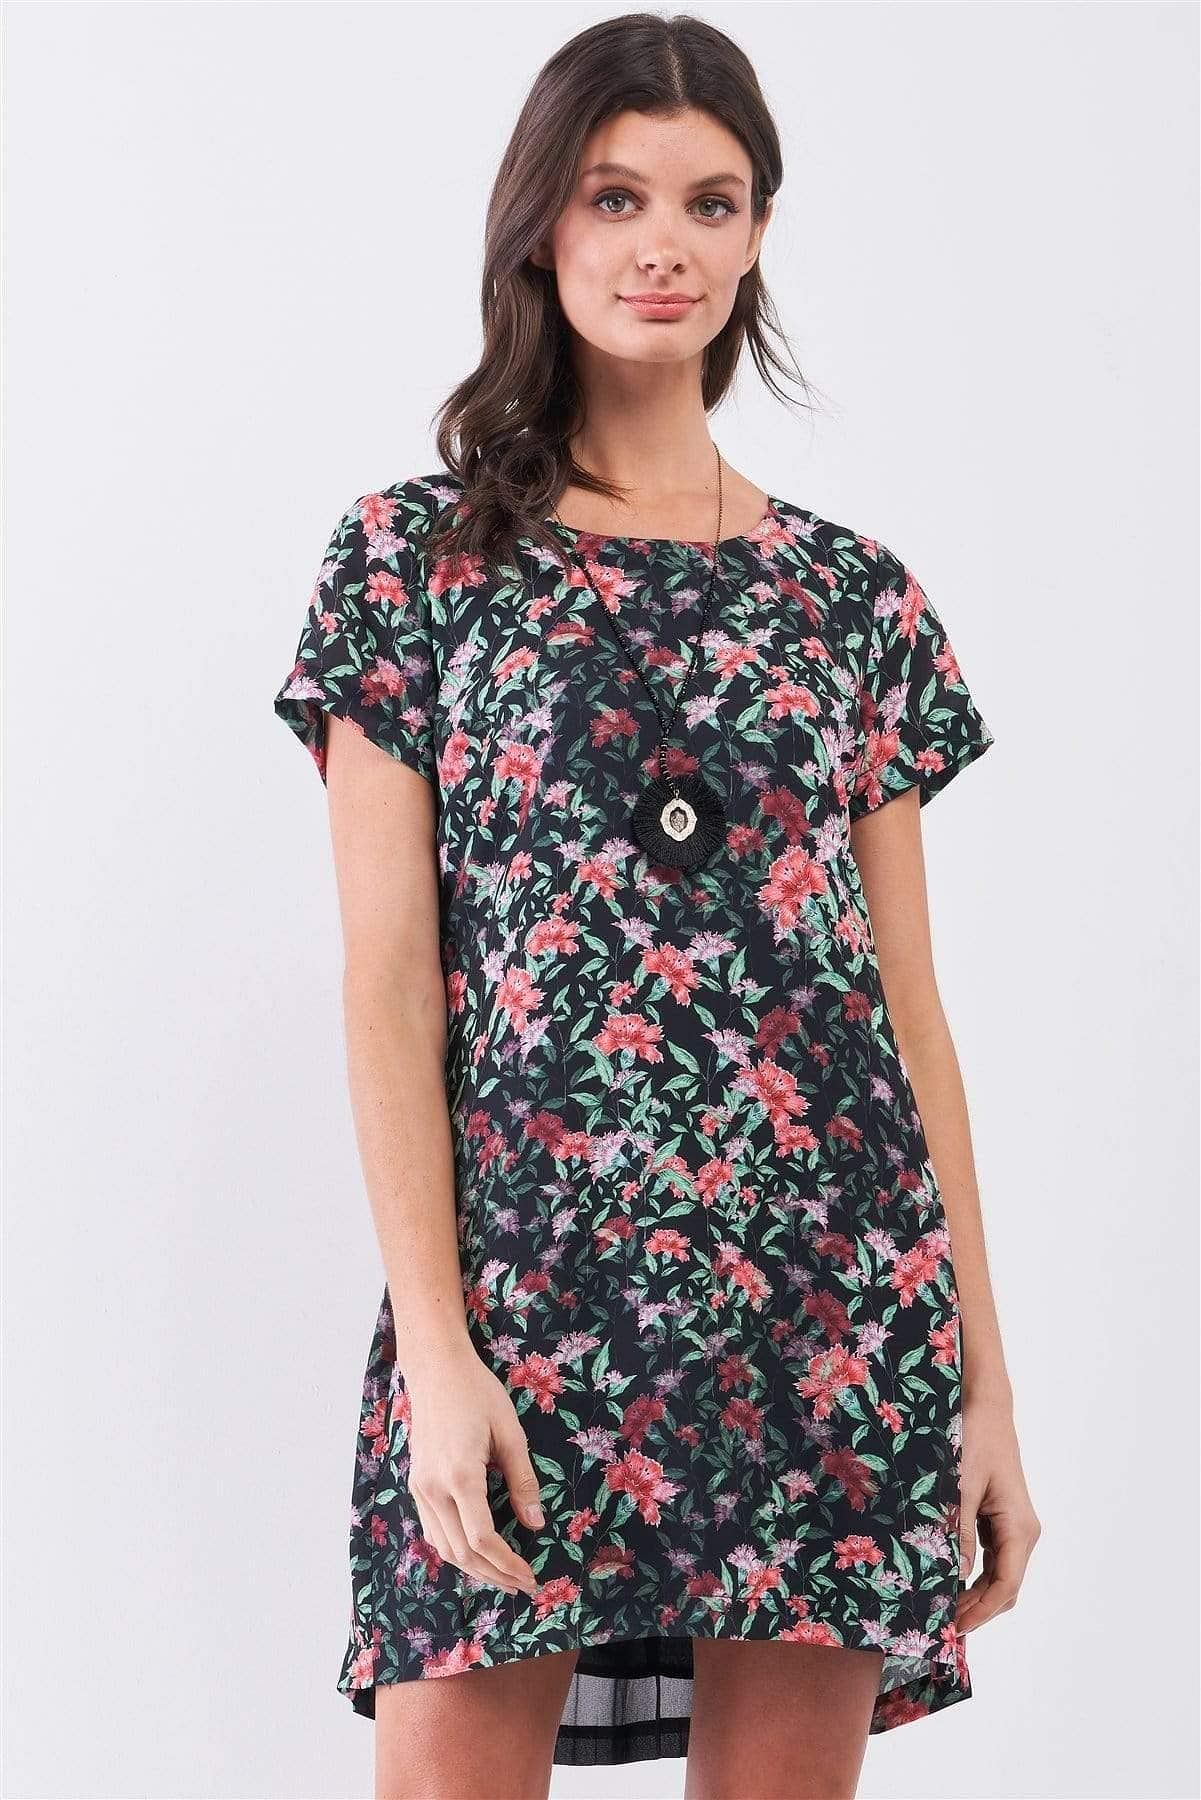 Short Sleeve Floral Print Mini Dress - Shopping Therapy XS